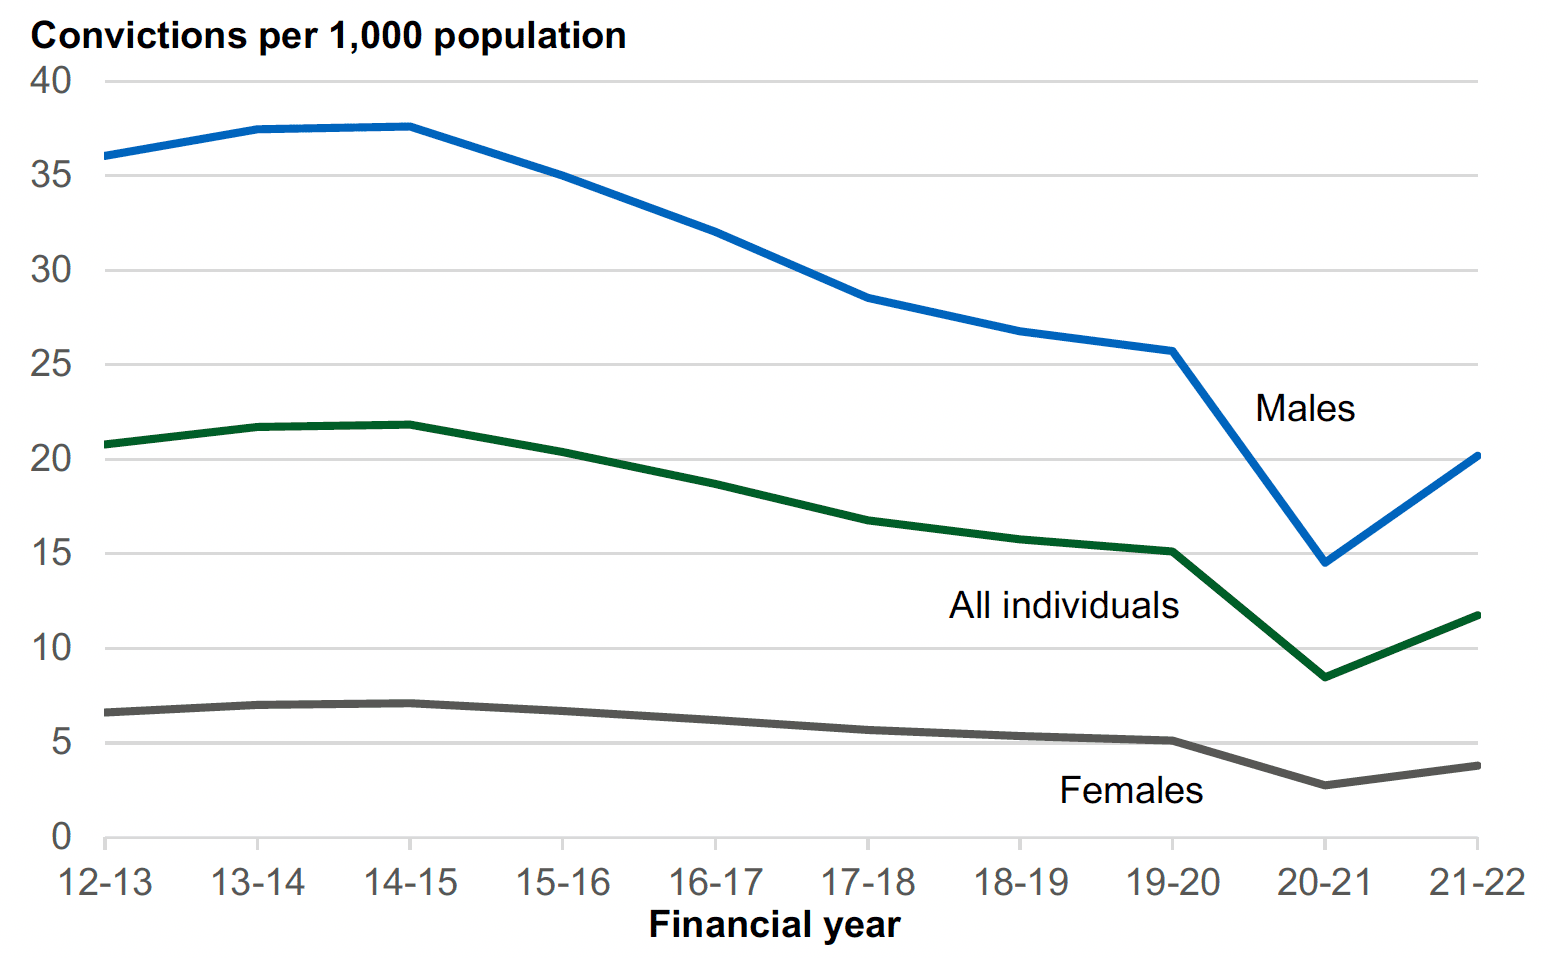 Line chart showing the number of convictions per 1,000 population for both males and females between 2012-13 and 2021-22.